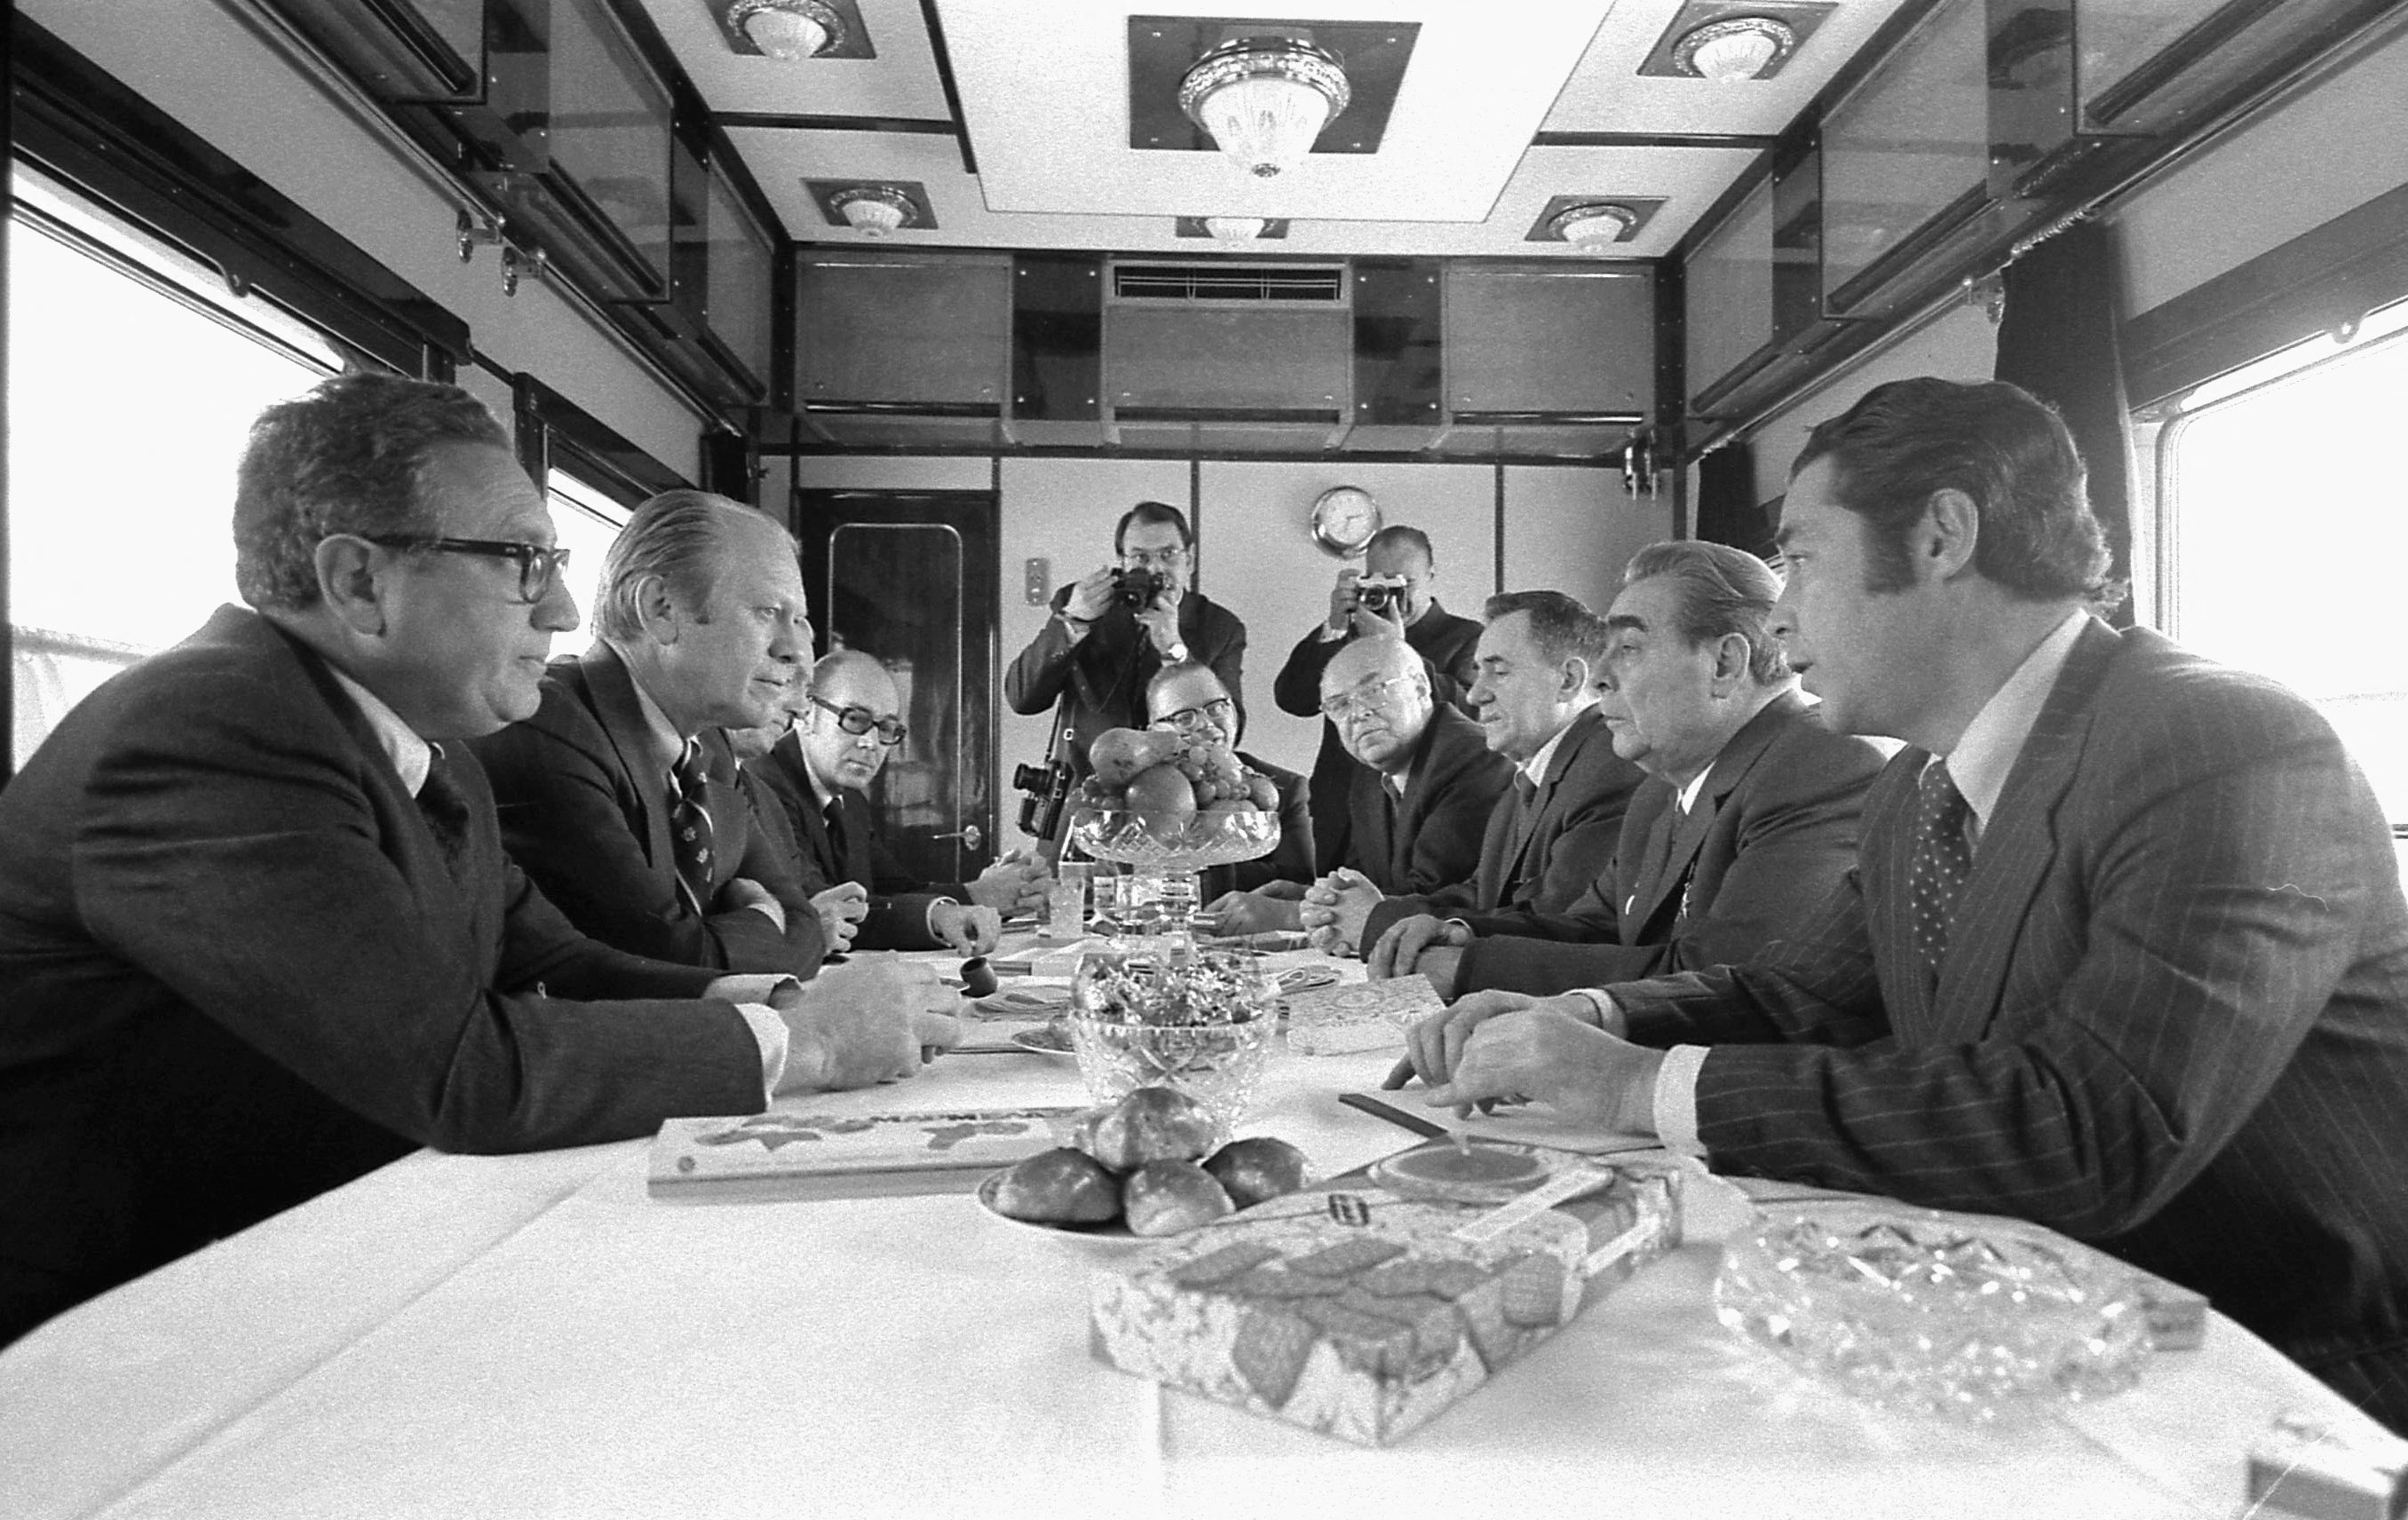 U.S. President Gerald Ford, Secretary of State Henry Kissinger and other U.S. representatives meet with Soviet General Secretary Brezhnev, Foreign Secretary Gromyko, Ambassador Dobrynin, and others aboard a Russian train headed for Vladivostok, Russia, November 23, 1974. Gerald R. Ford Library/via REUTERS 